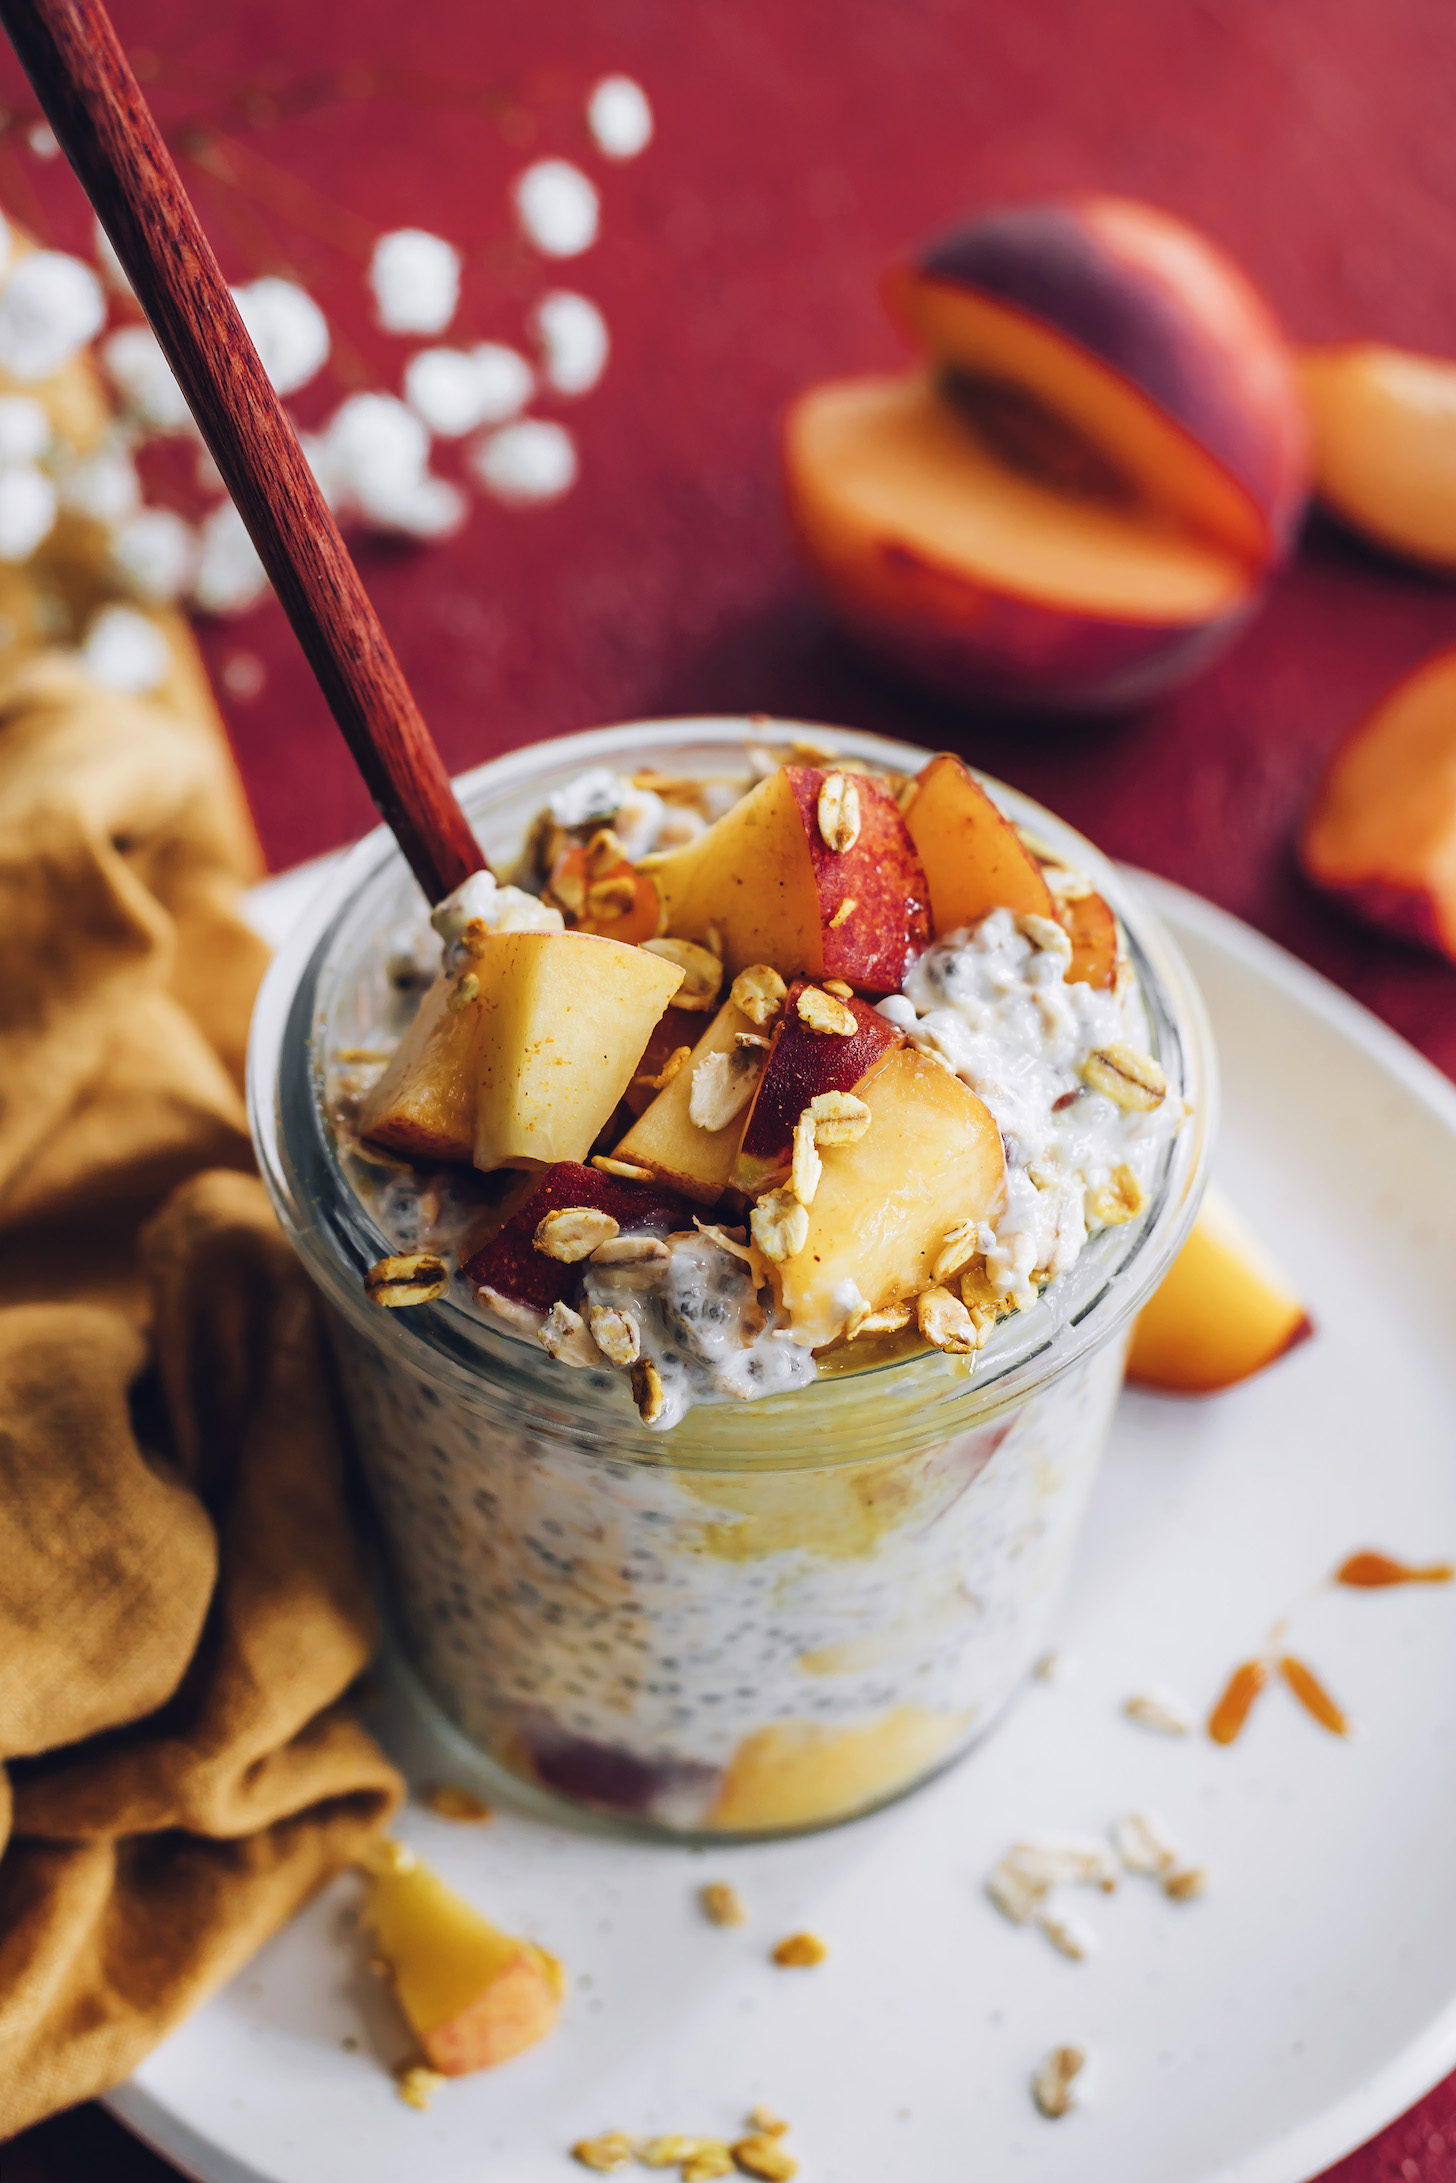 Spoon in a jar of peaches and cream overnight oats